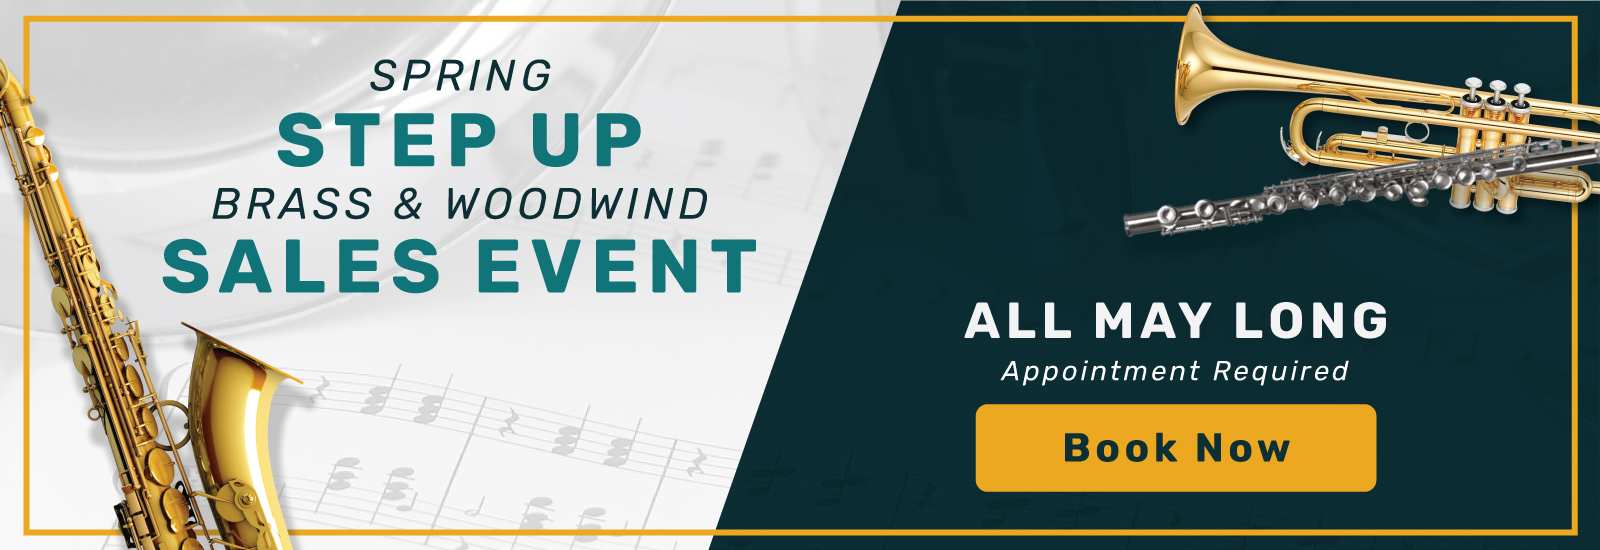 Spring Step Up Sales Event for Band Instruments